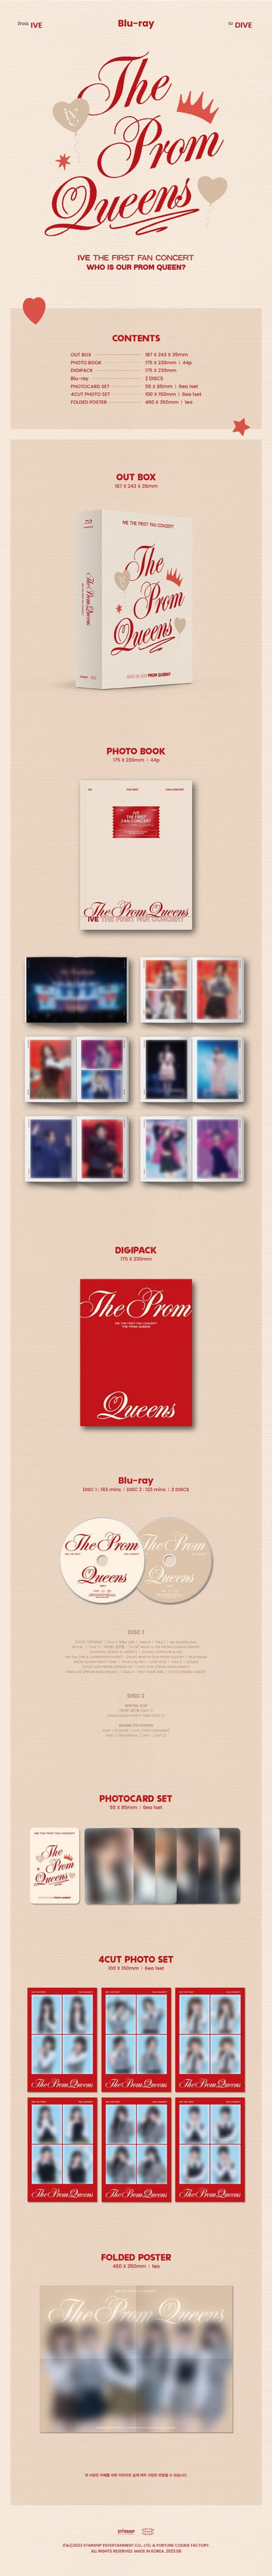 [PREORDER] IVE - THE FIRST FAN CONCERT [THE PROM QUEENS] BLU-RAY